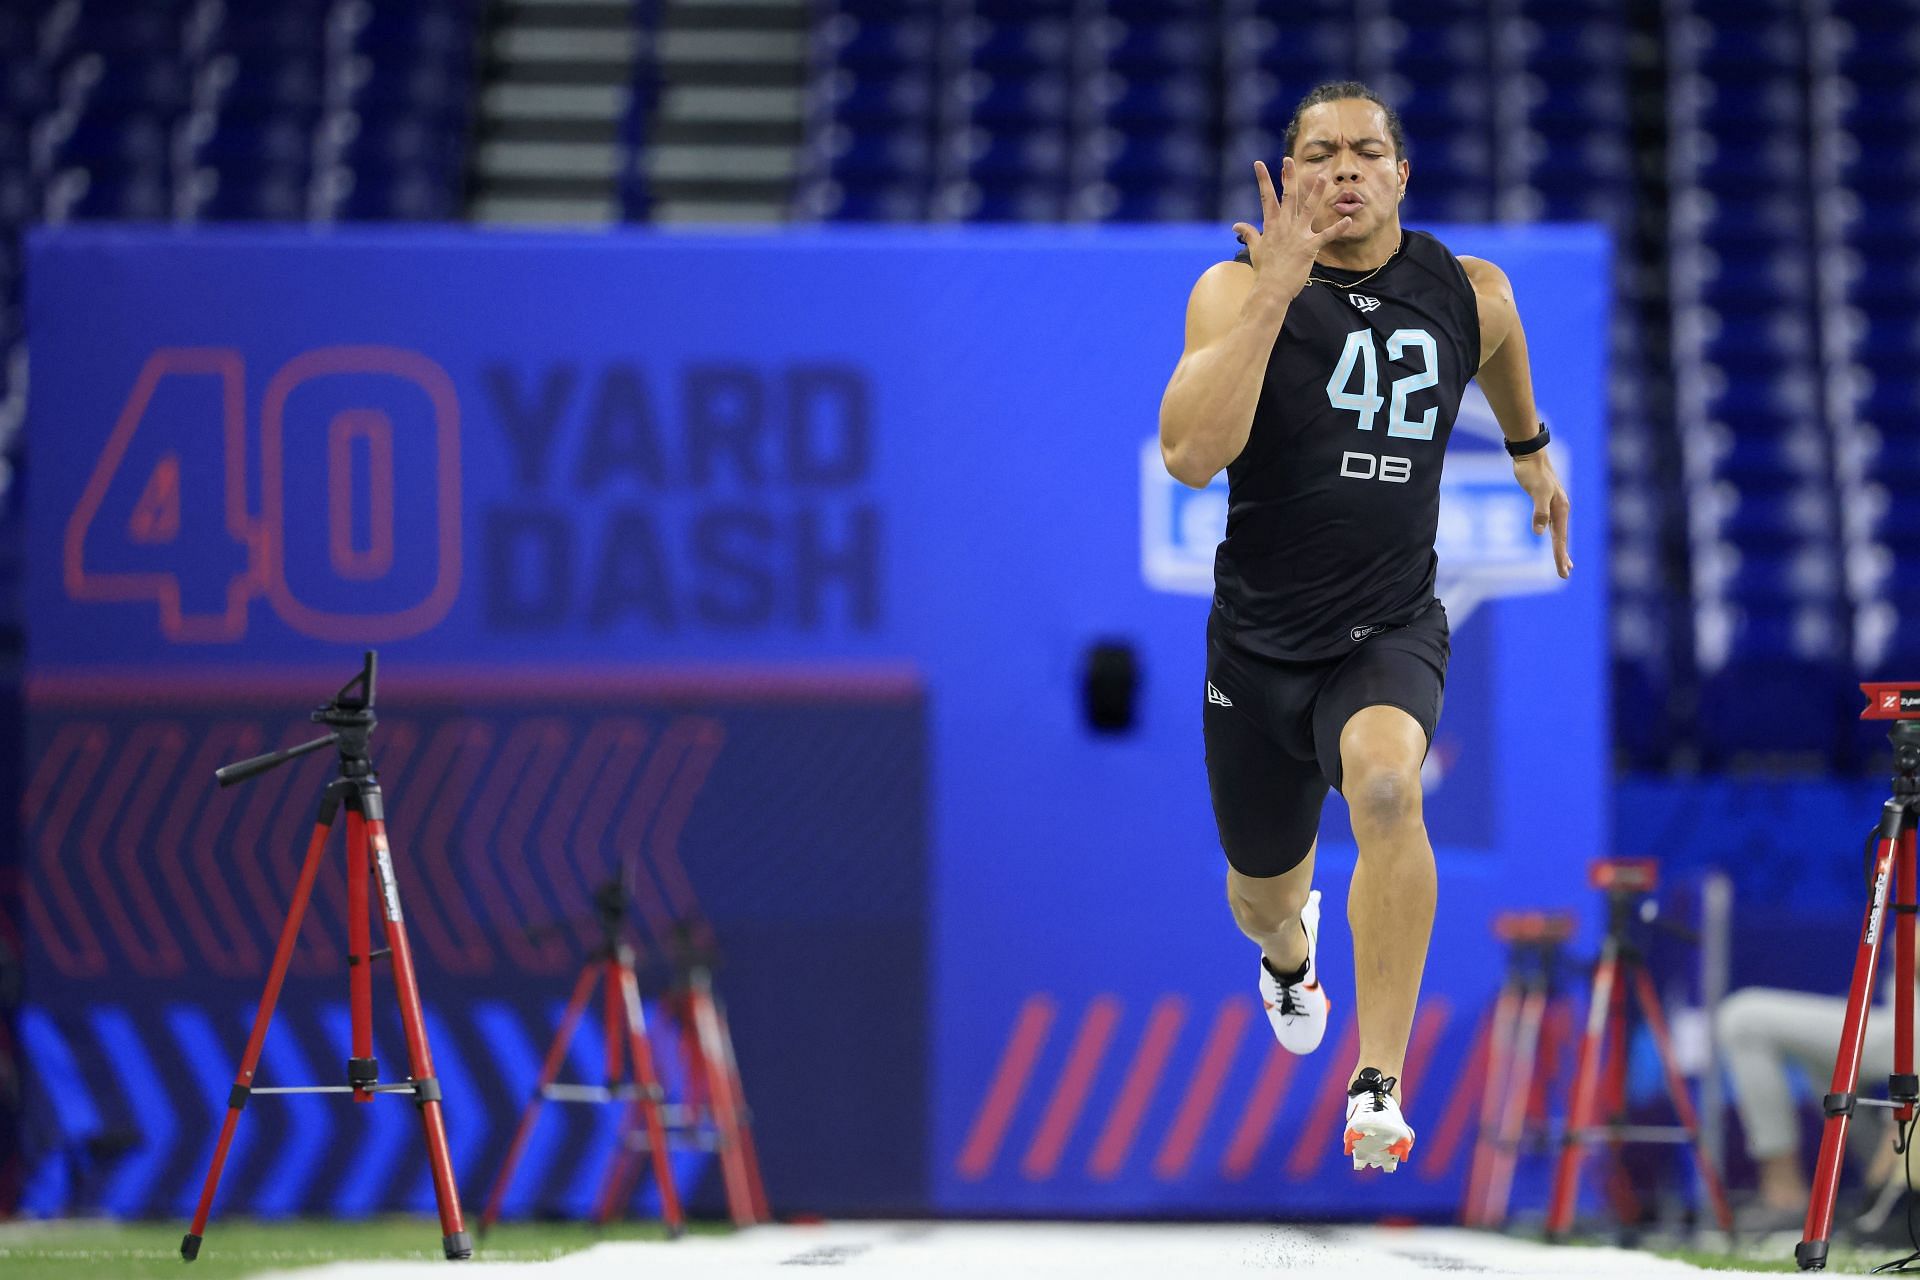 "Would you share your history?" Top 5 craziest NFL Combine